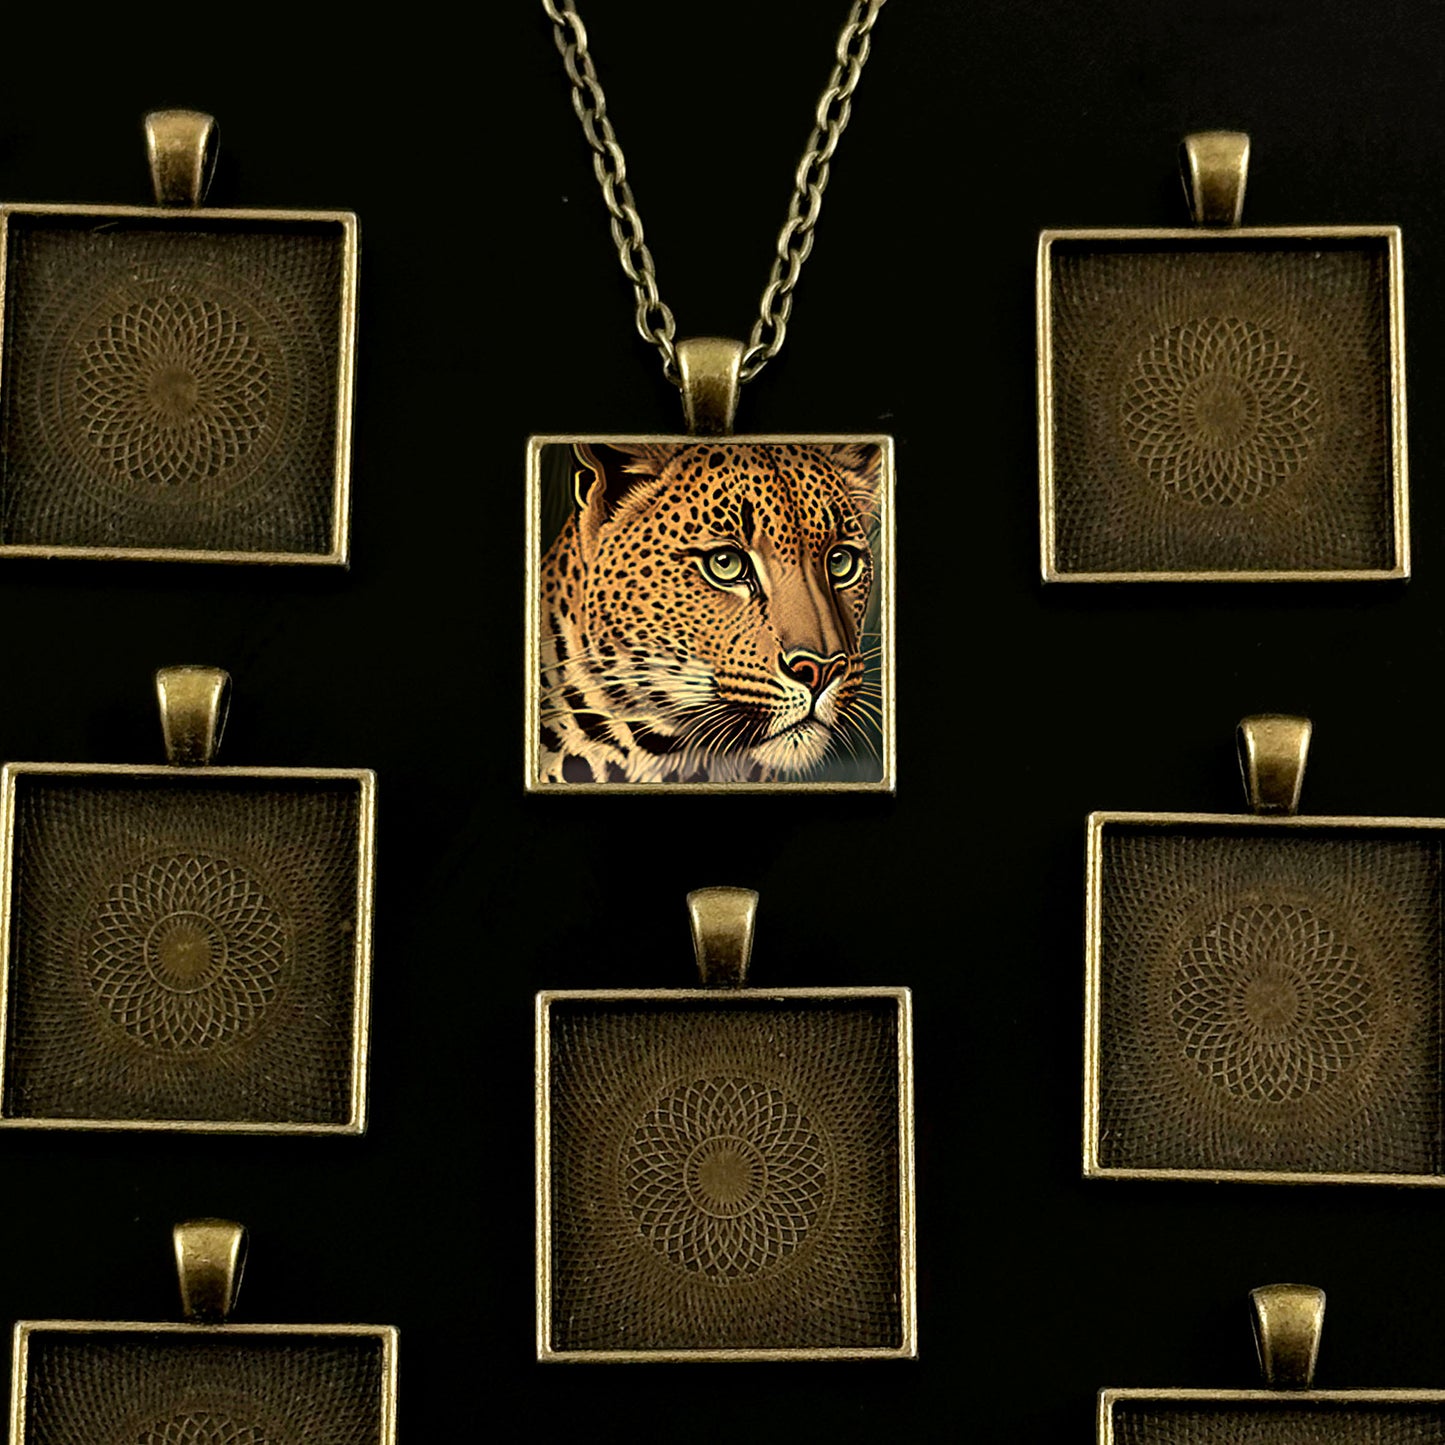 Makes 20 Square Photo Jewelry Pendant Necklaces Kit 25mm 1 Inch Antique Bronze Gold